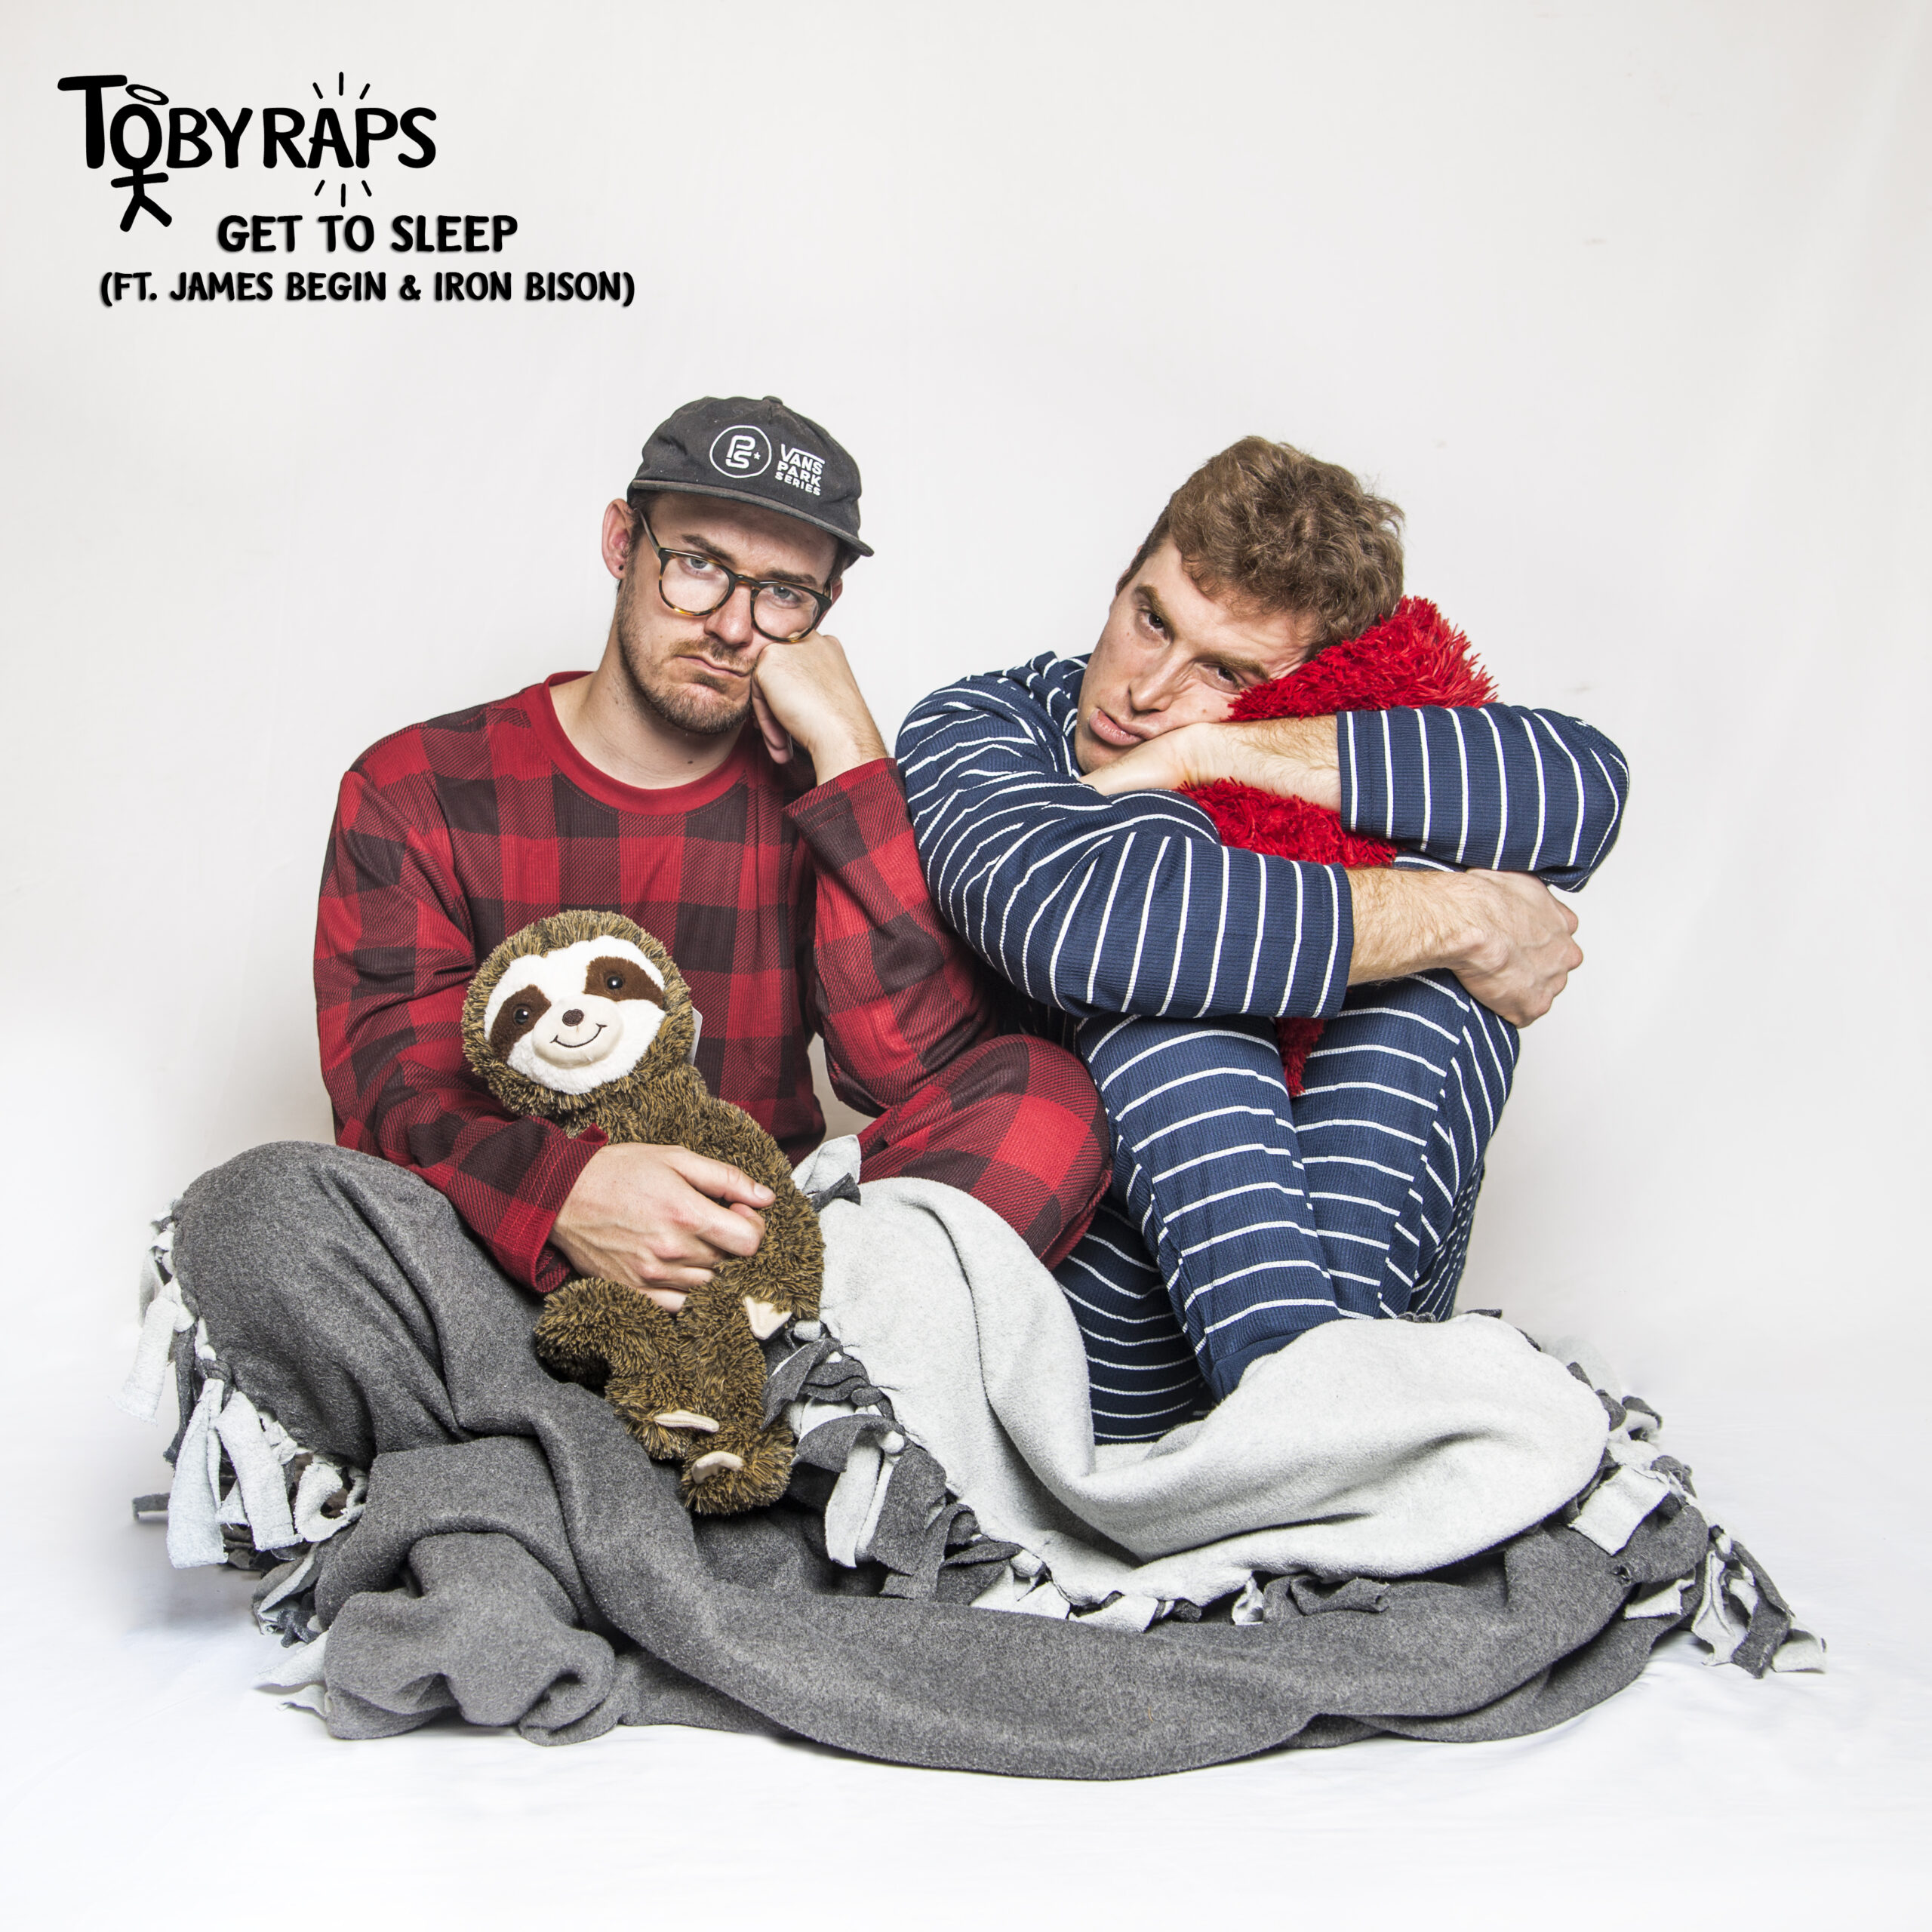 Tobyraps Urges Fans to 'Get to Sleep' to Better Enjoy Life